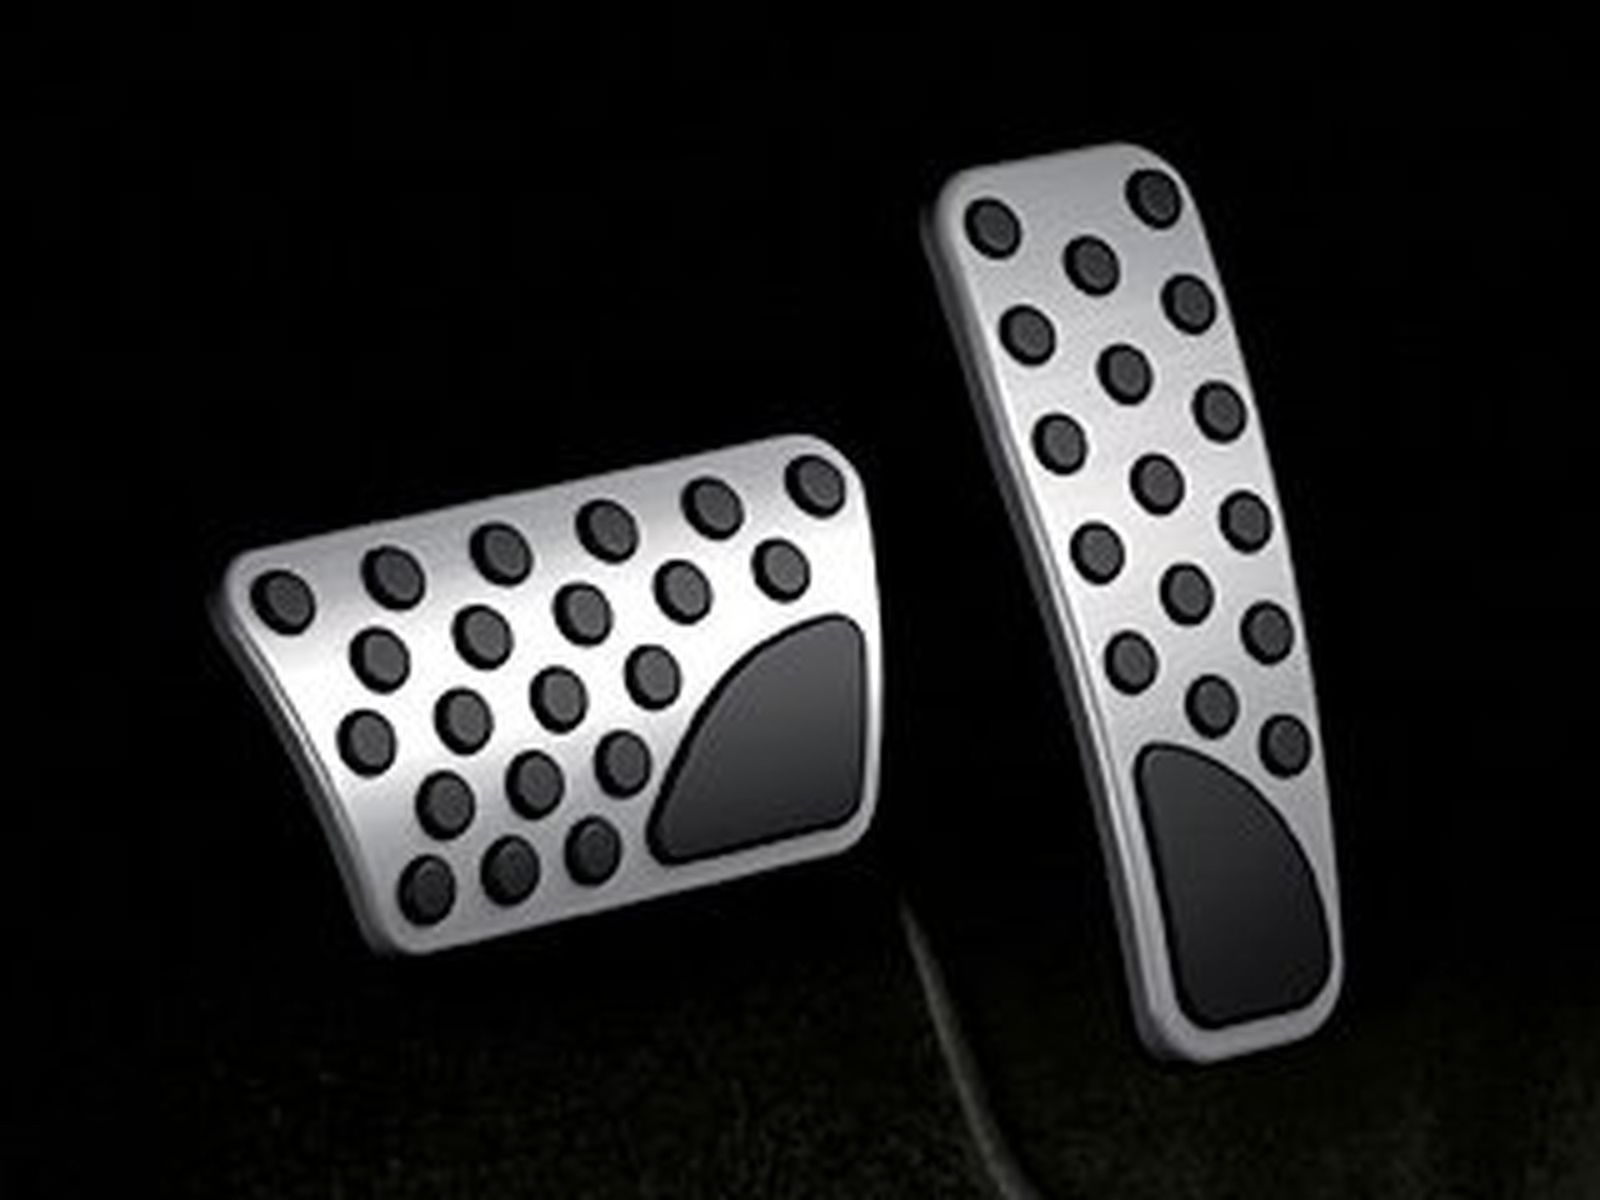 Mopar Stainless Gas-Brake Pedal Covers 05-up Charger, Magnum,300